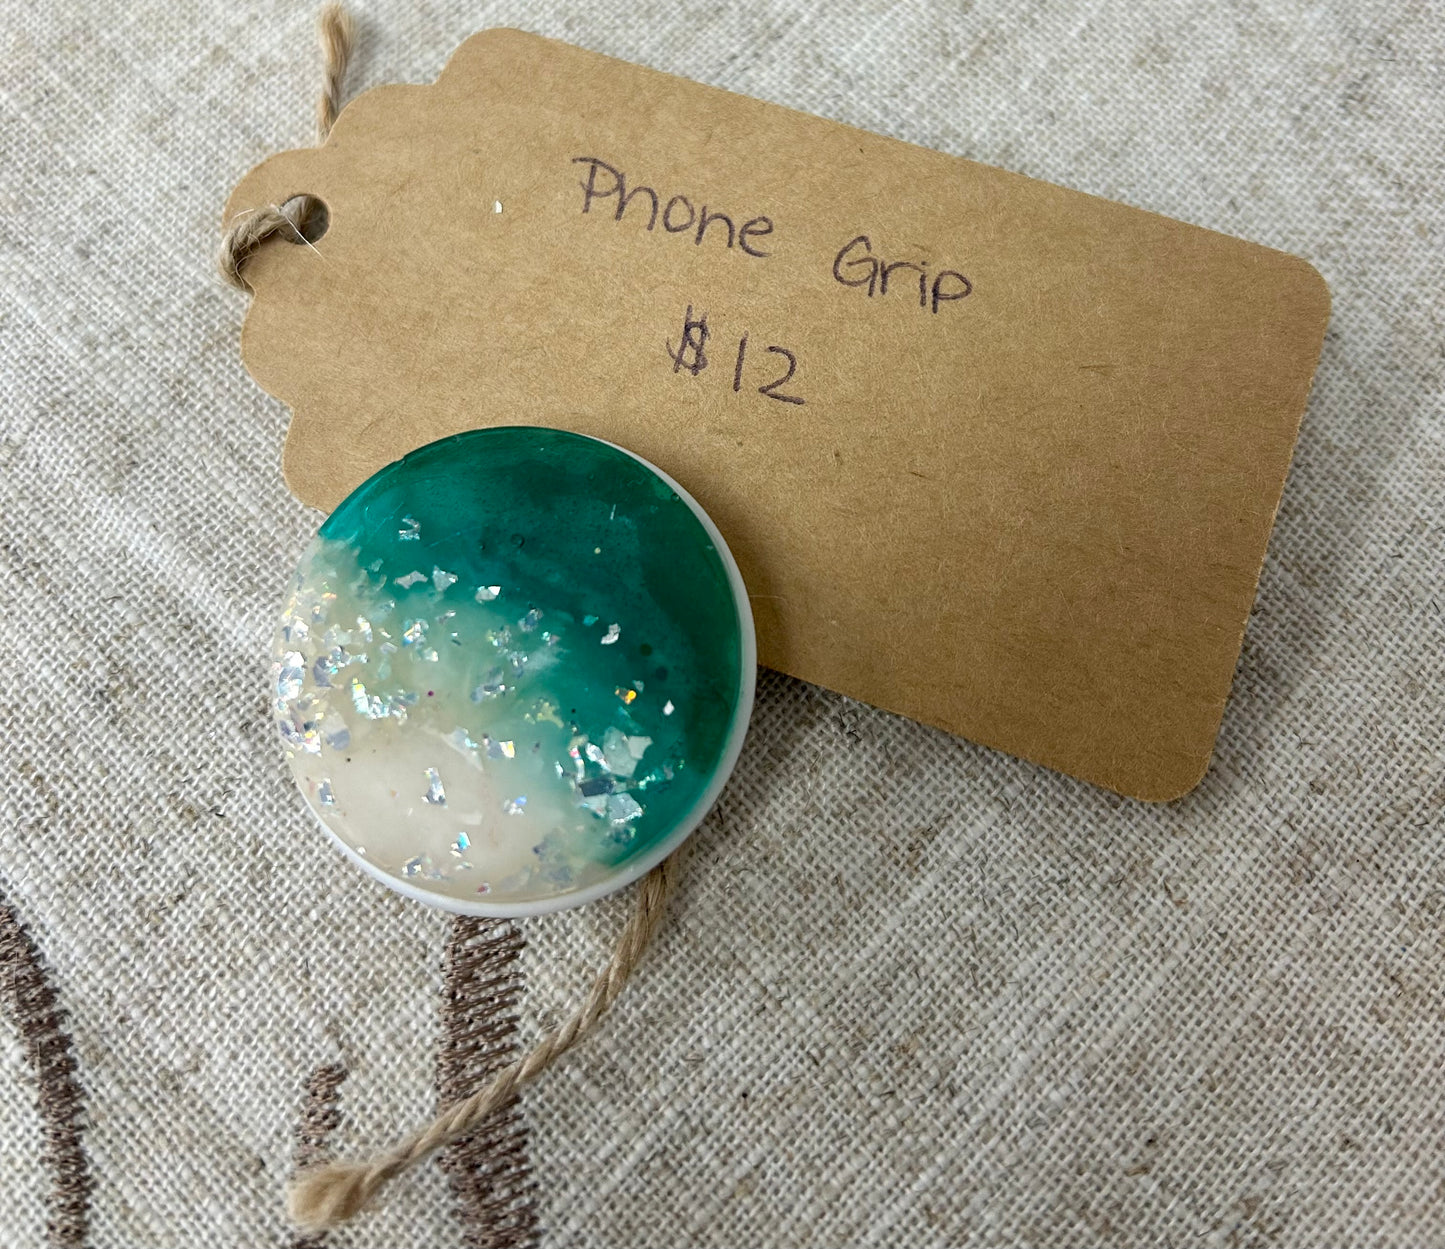 Accessorize your phone - Phone Grips